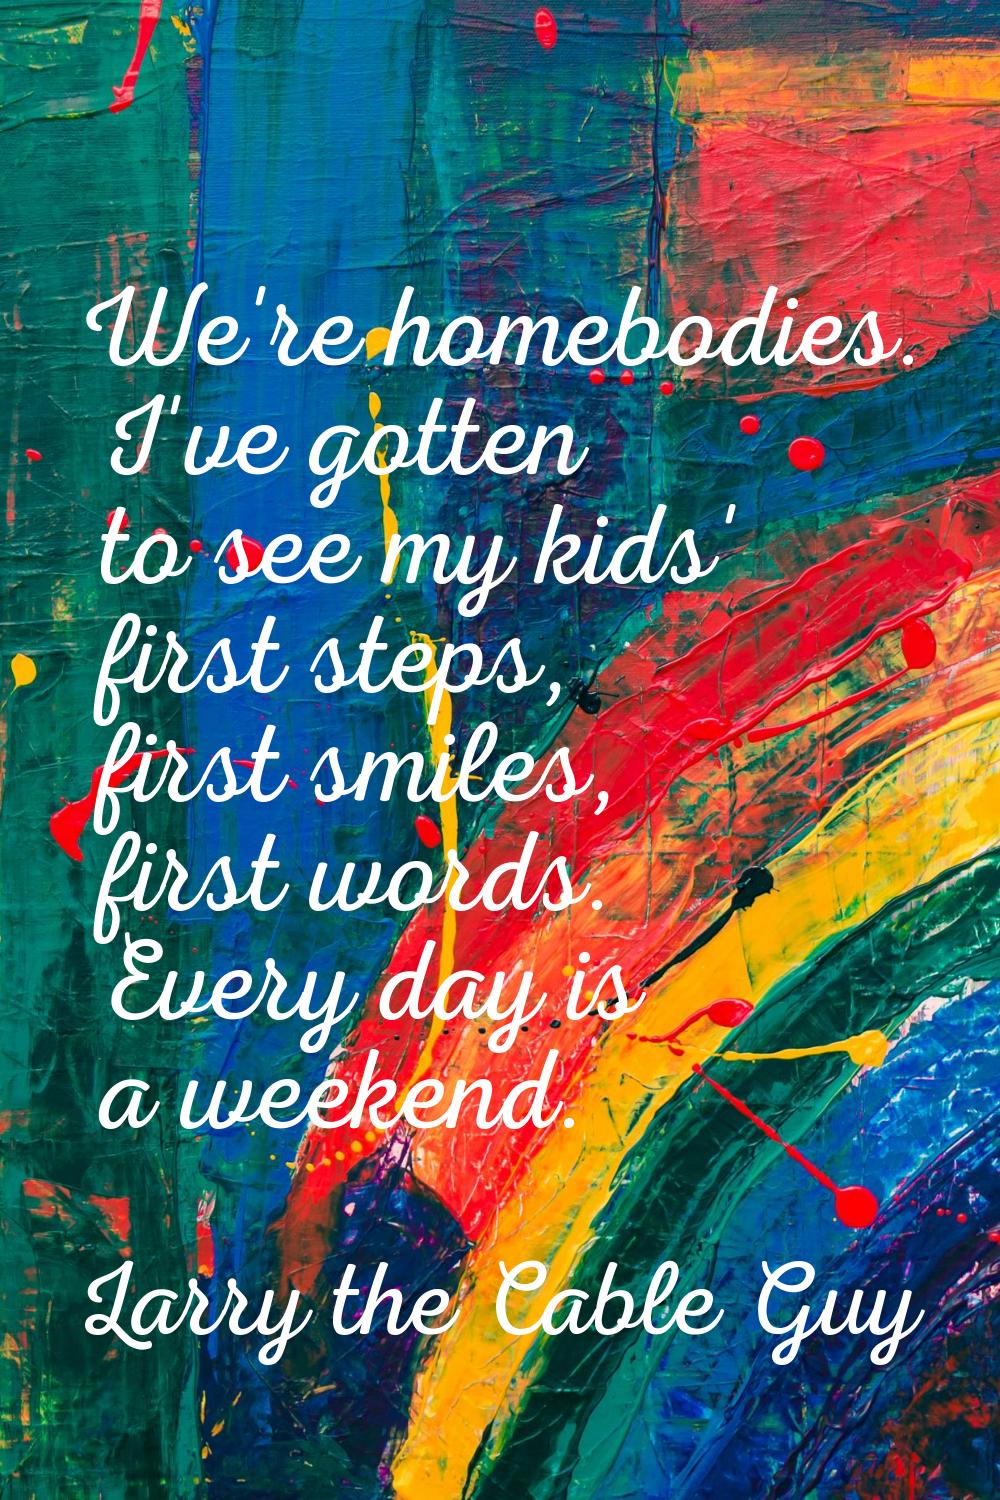 We're homebodies. I've gotten to see my kids' first steps, first smiles, first words. Every day is 